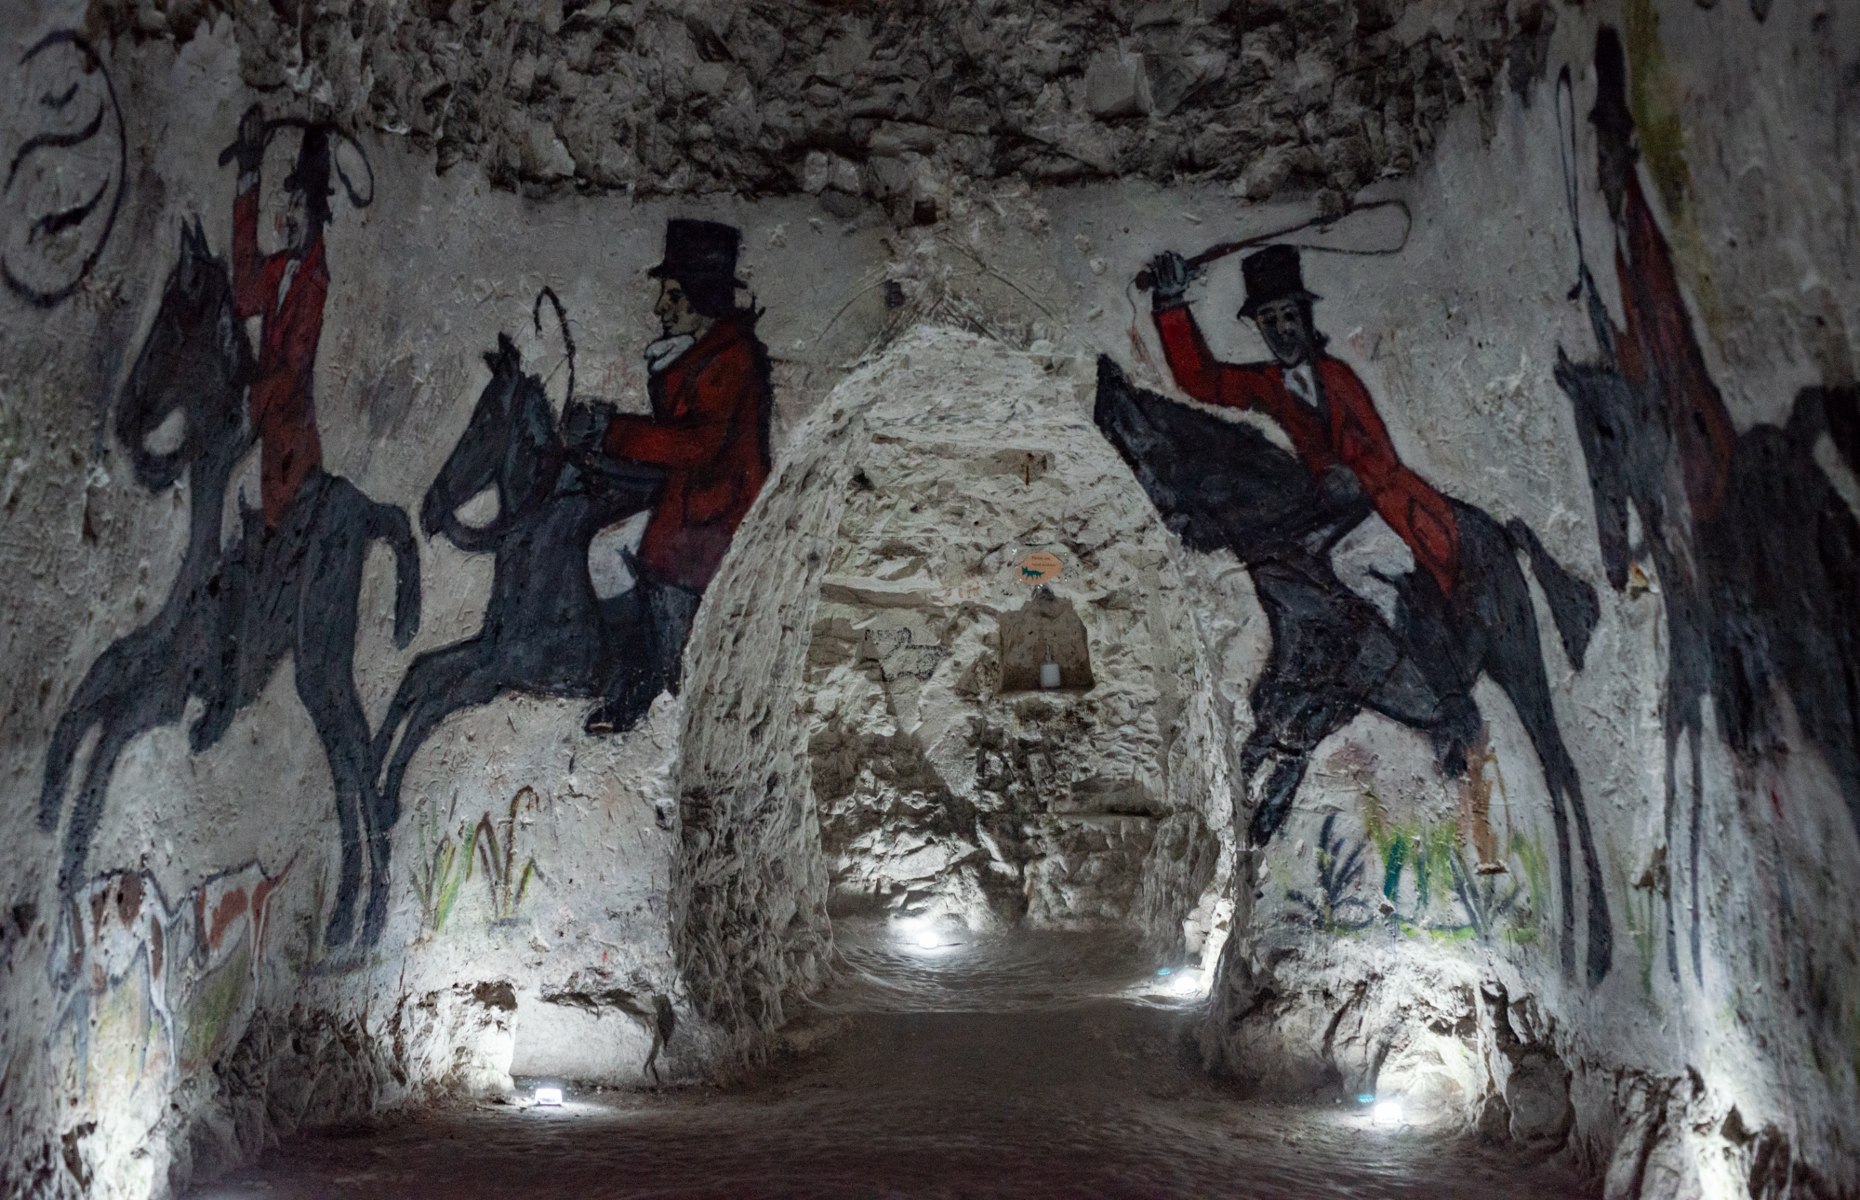 Artwork inside the caves (Image: Diana Jarvis)